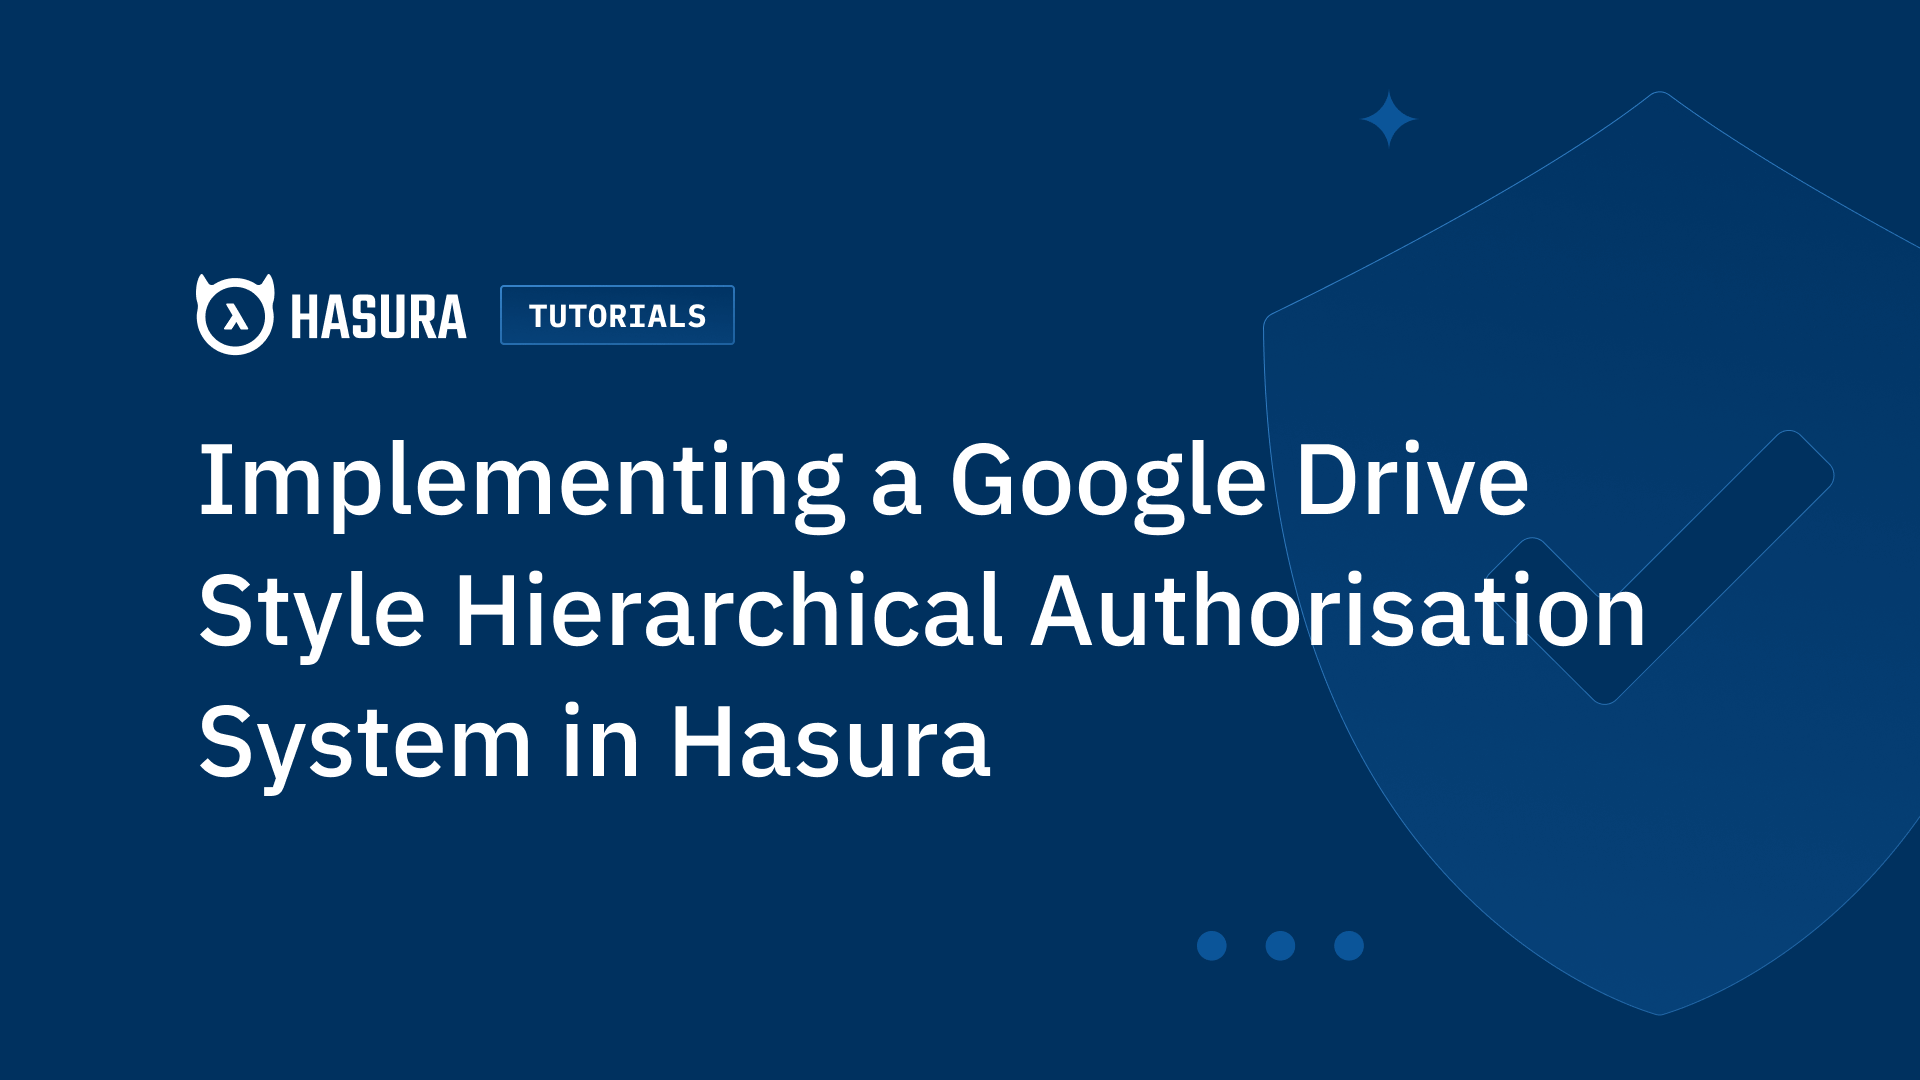 Implementing a Google Drive Style Hierarchical Authorization System in Hasura